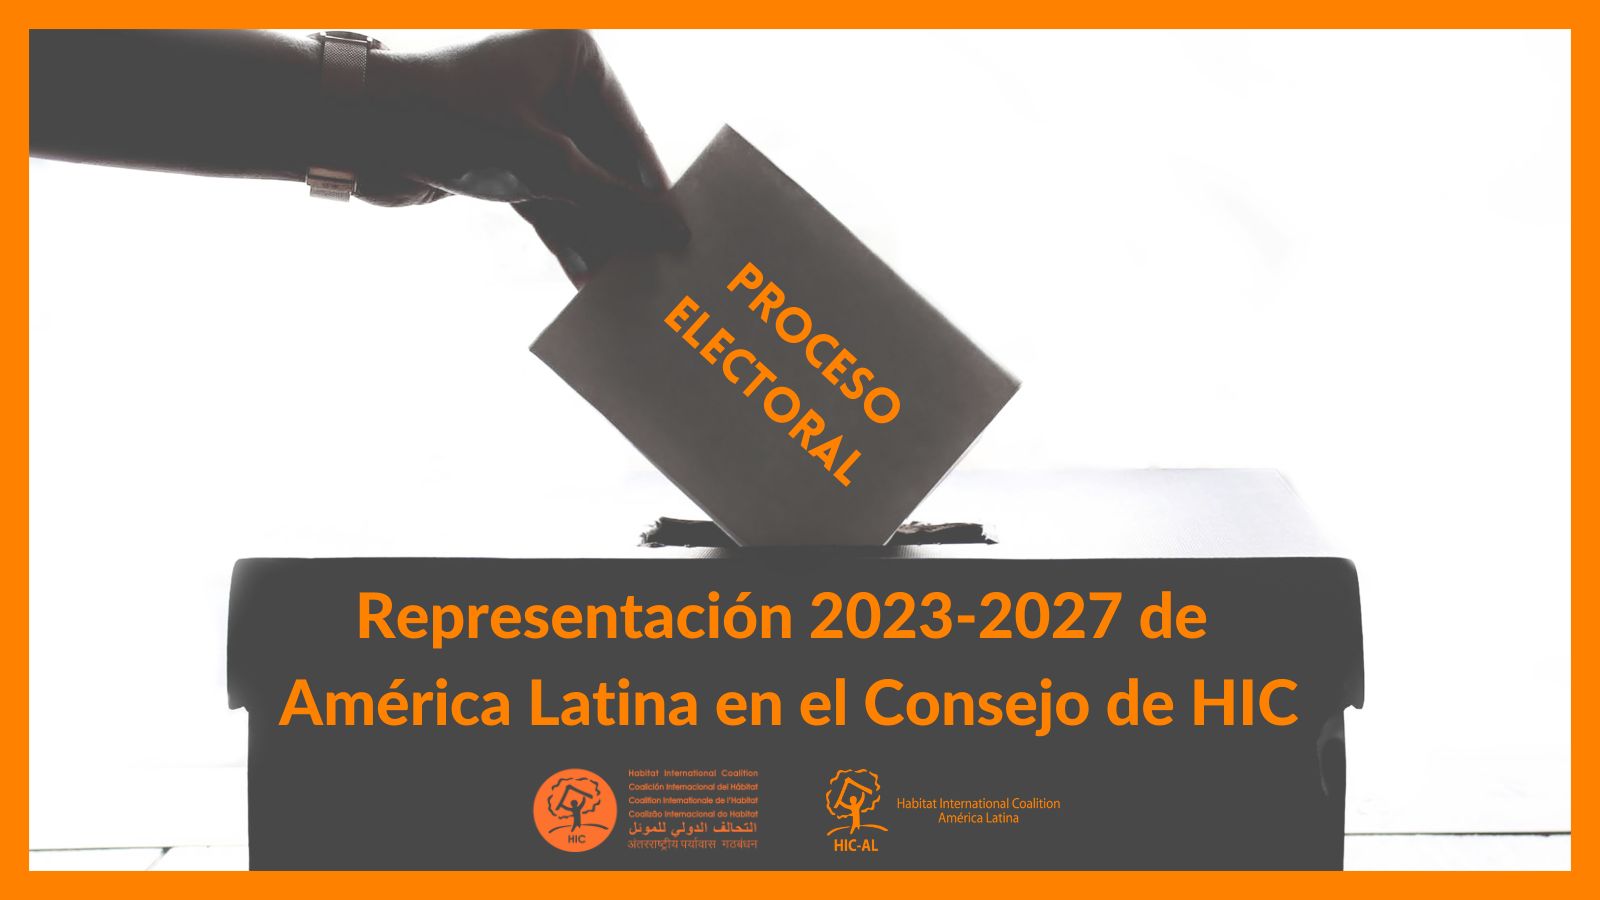 Launch of the election process for the 2023-2027 Latin American representation on the HIC Board